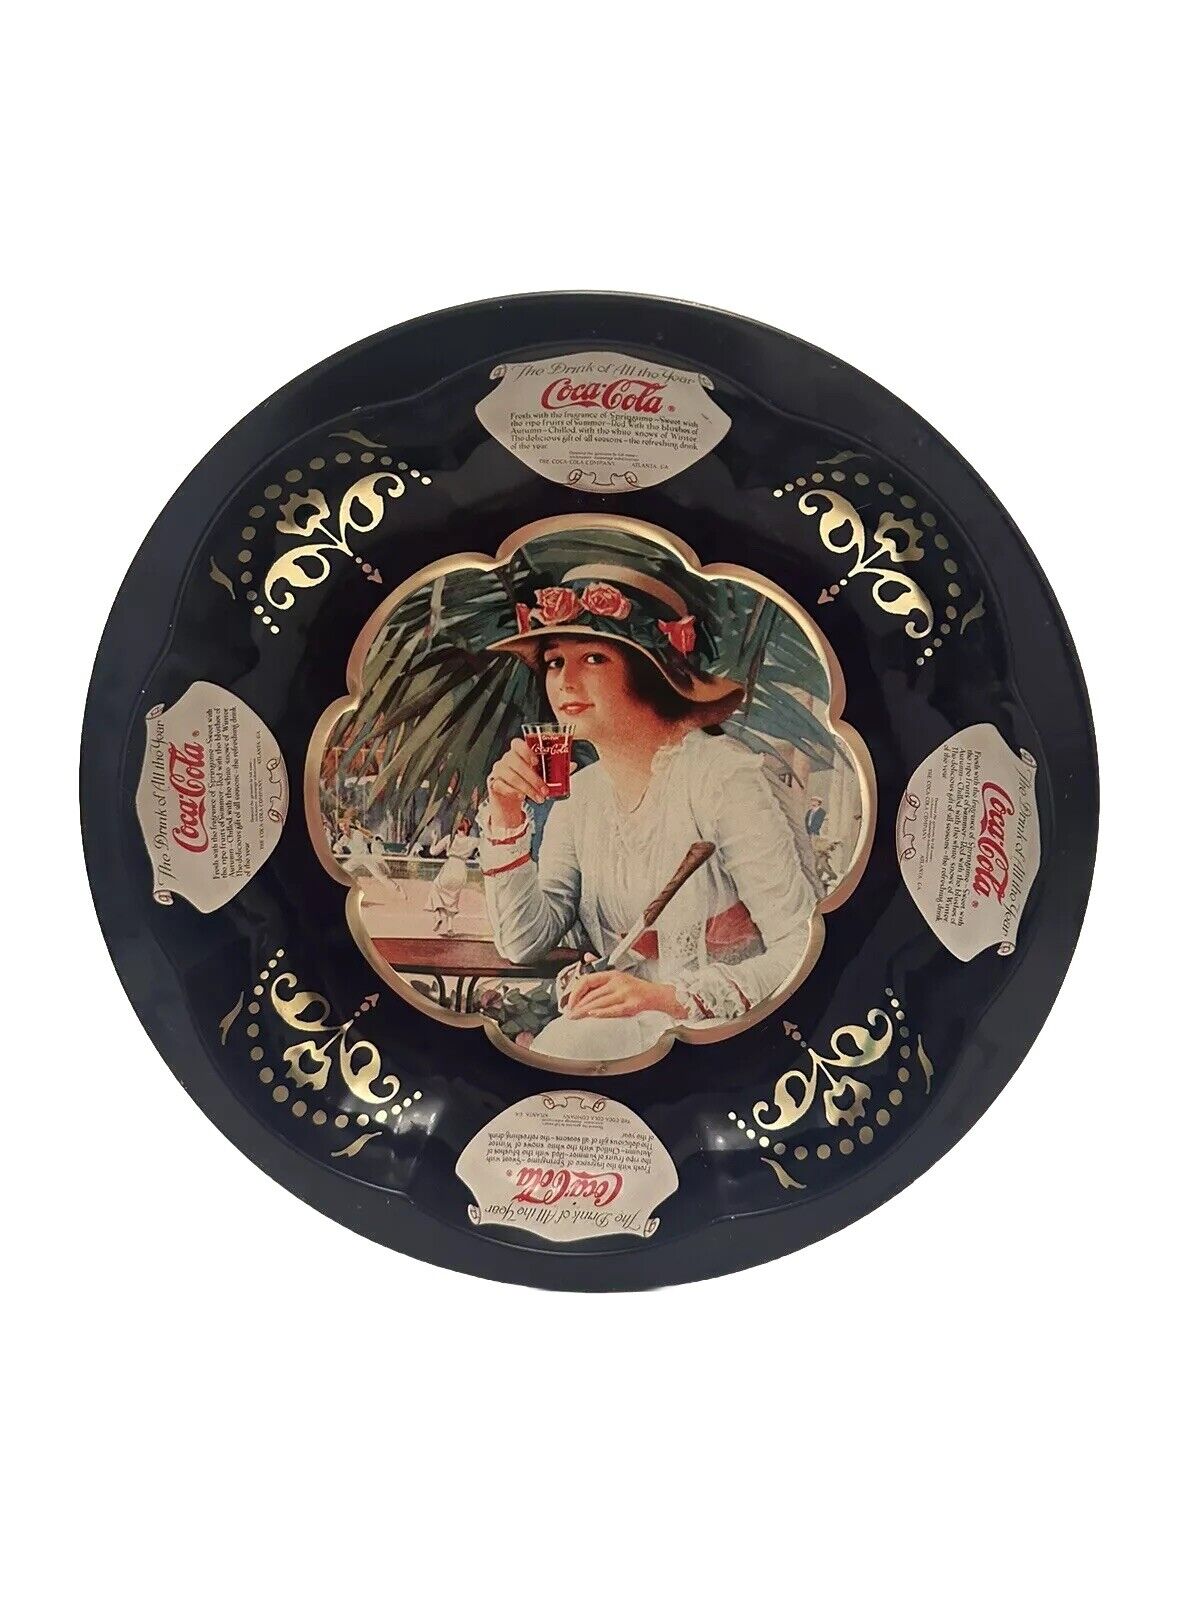 Coco-Cola reproduction round serving tray